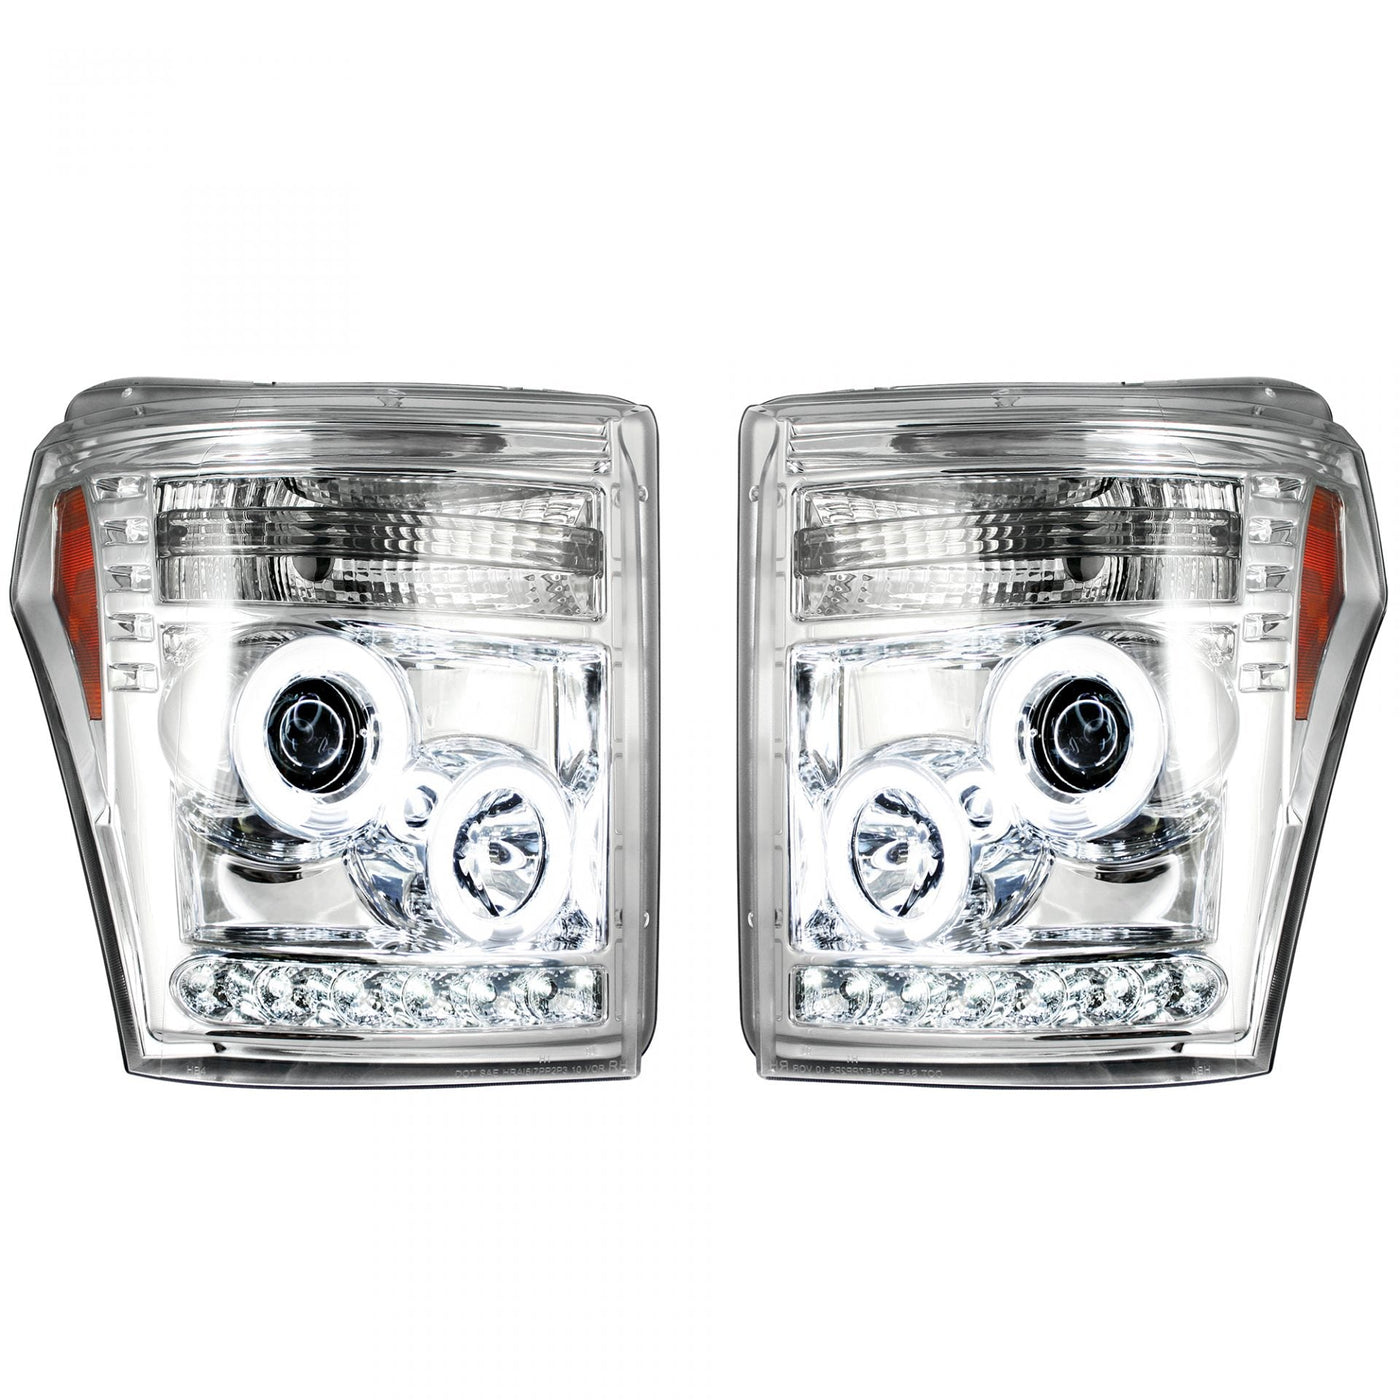 Ford Projector Headlights, Superduty Projector Headlights, Superduty 11-16 Projector Headlights, Clear/Chrome Headlights, Recon Projector Headlights